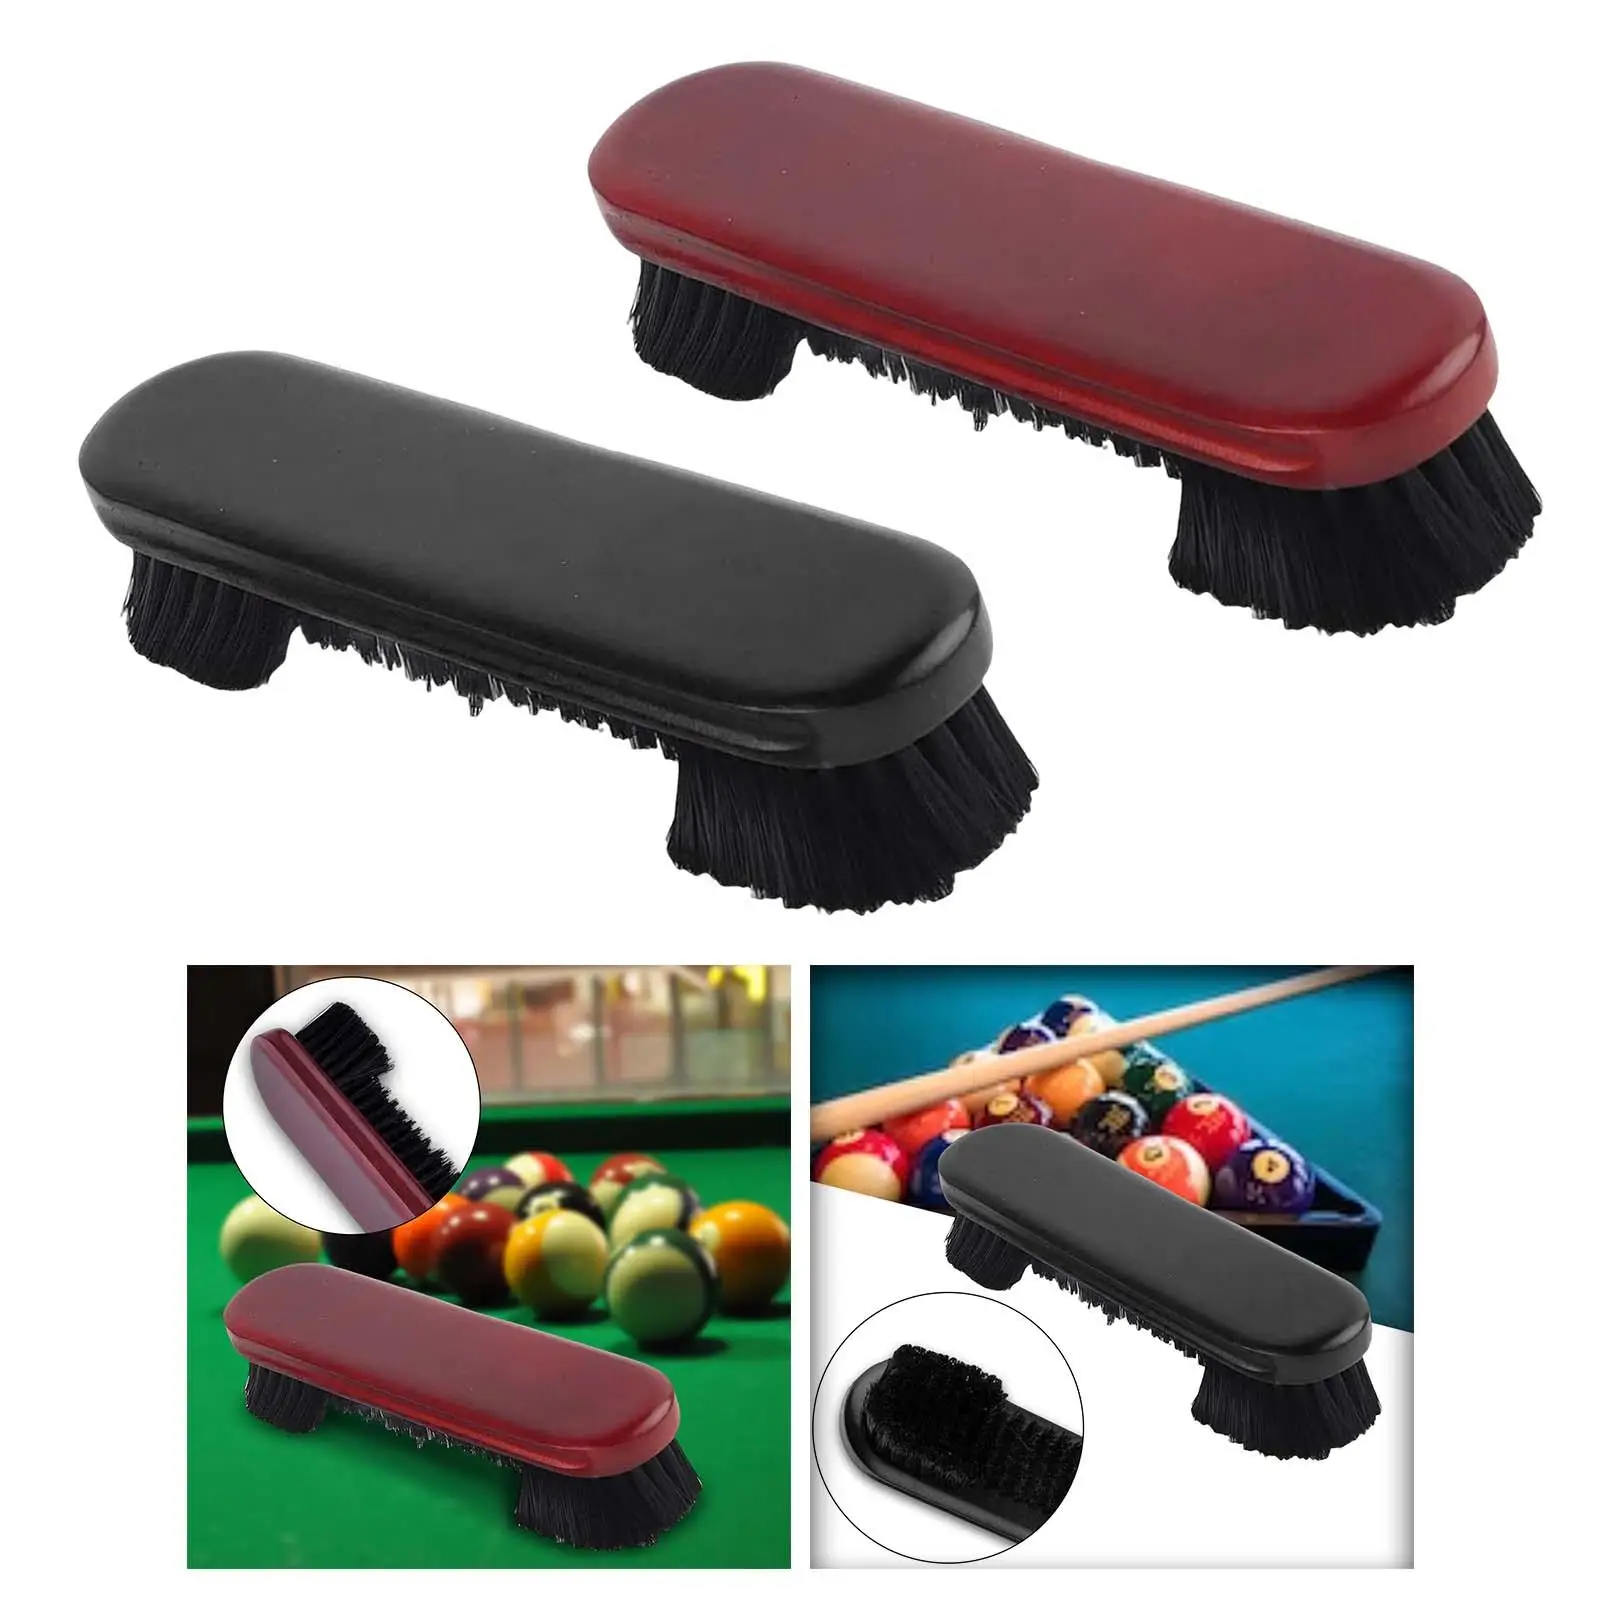 Wooden Billiard Pool Table Brush Cleaning Tool PVC Bristles Premium Cleaning Brush Cleaner 9 Inches Pool Snooker Accessories